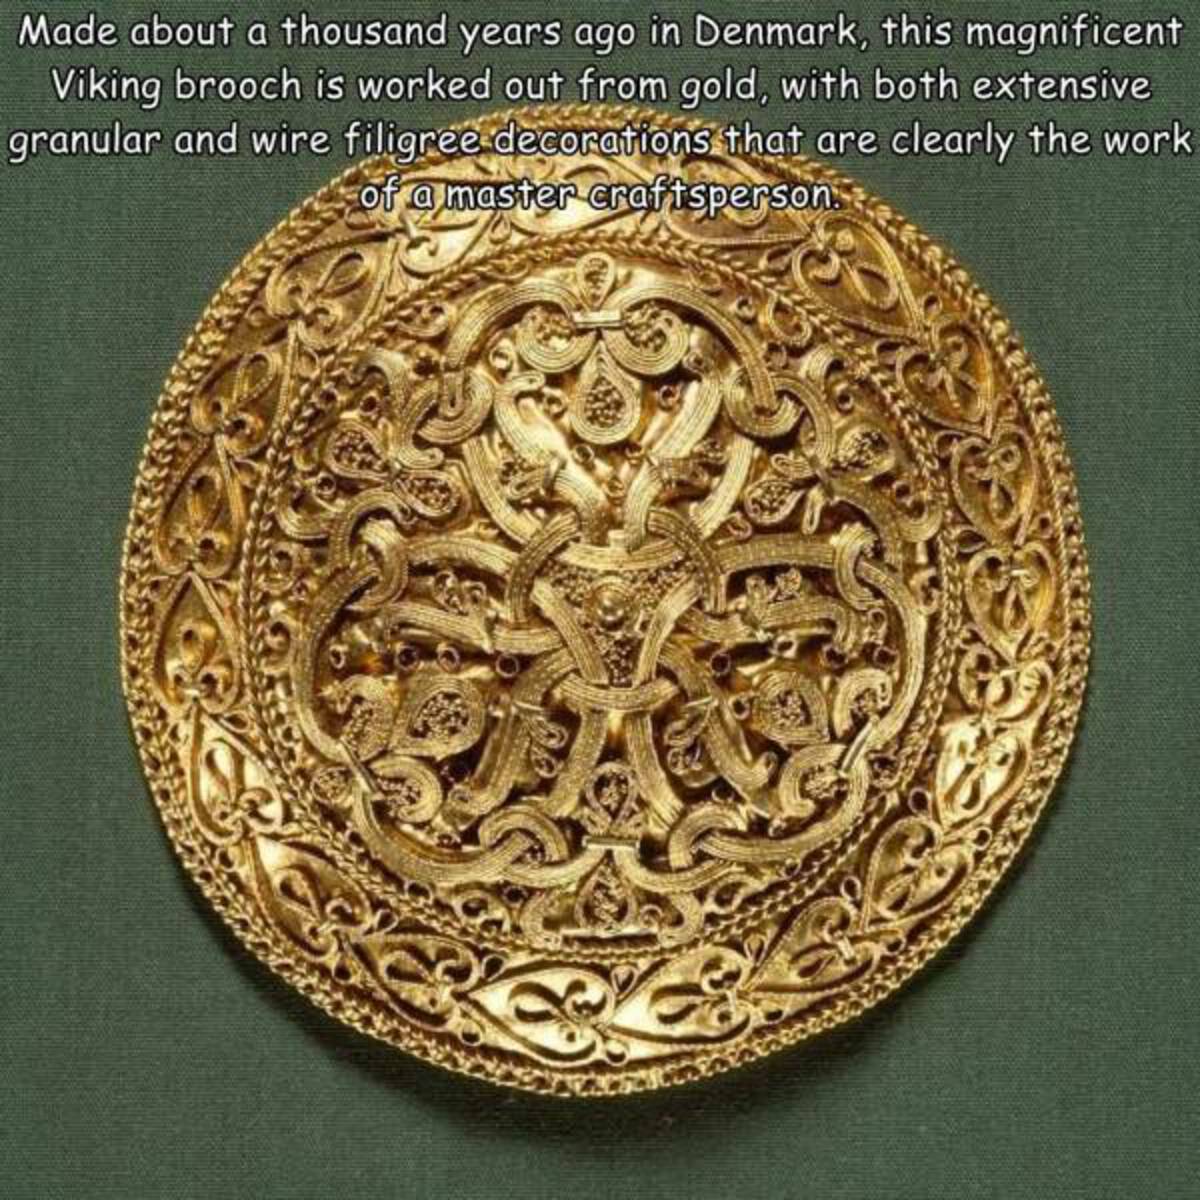 wellington arch - Made about a thousand years ago in Denmark, this magnificent Viking brooch is worked out from gold, with both extensive granular and wire filigree decorations that are clearly the work of a master craftsperson.